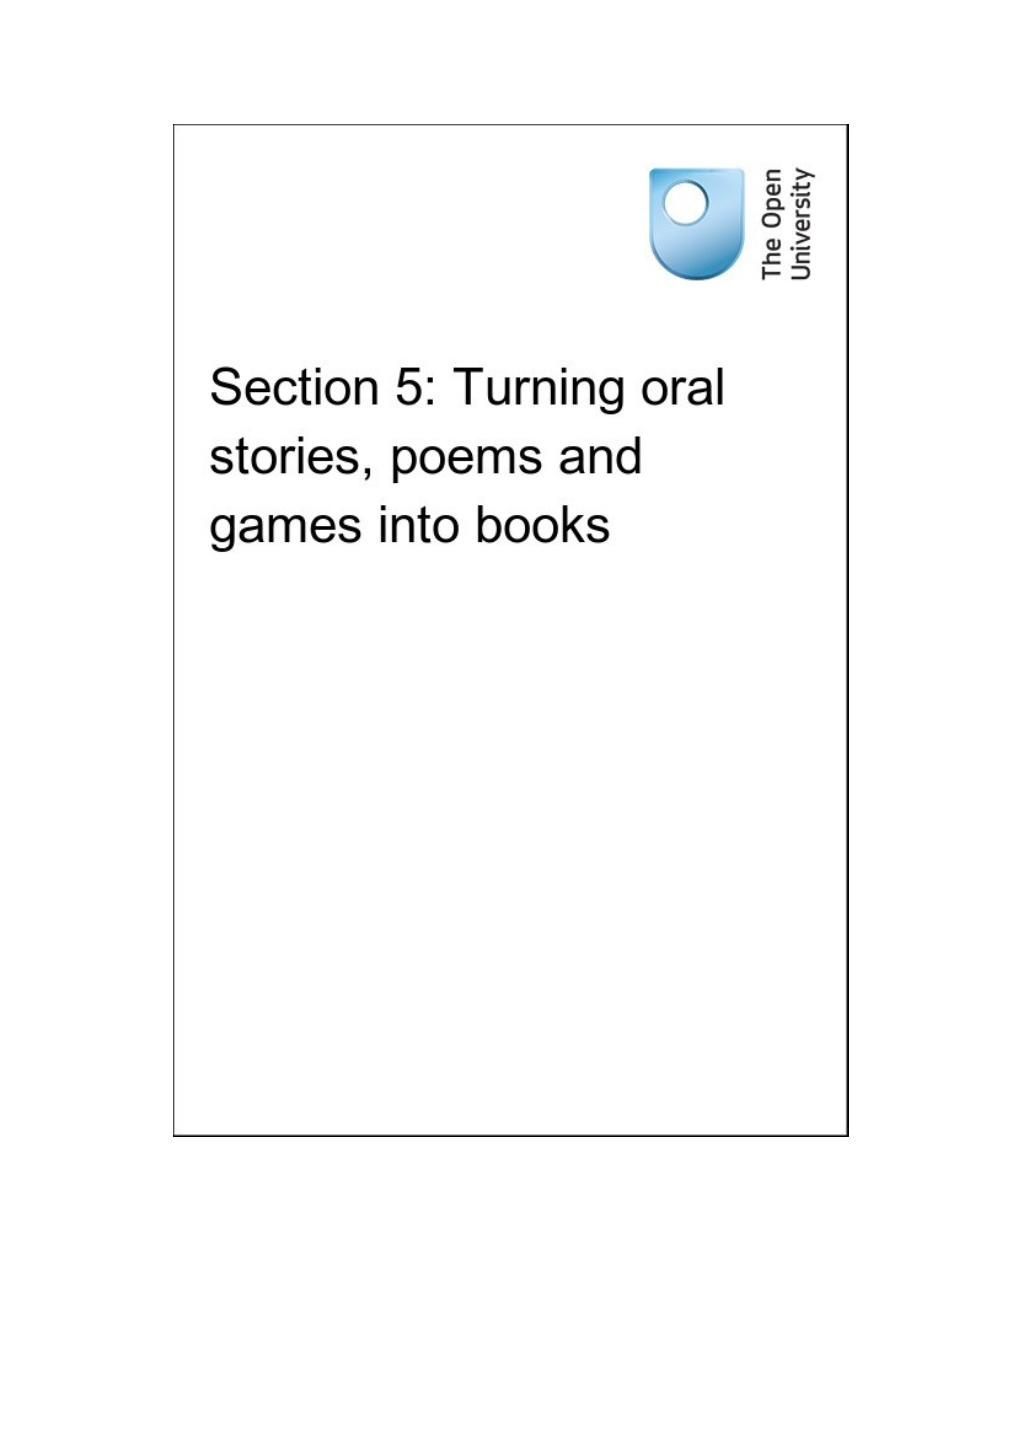 Section 5: Turning Oral Stories, Poems and Games Into Books